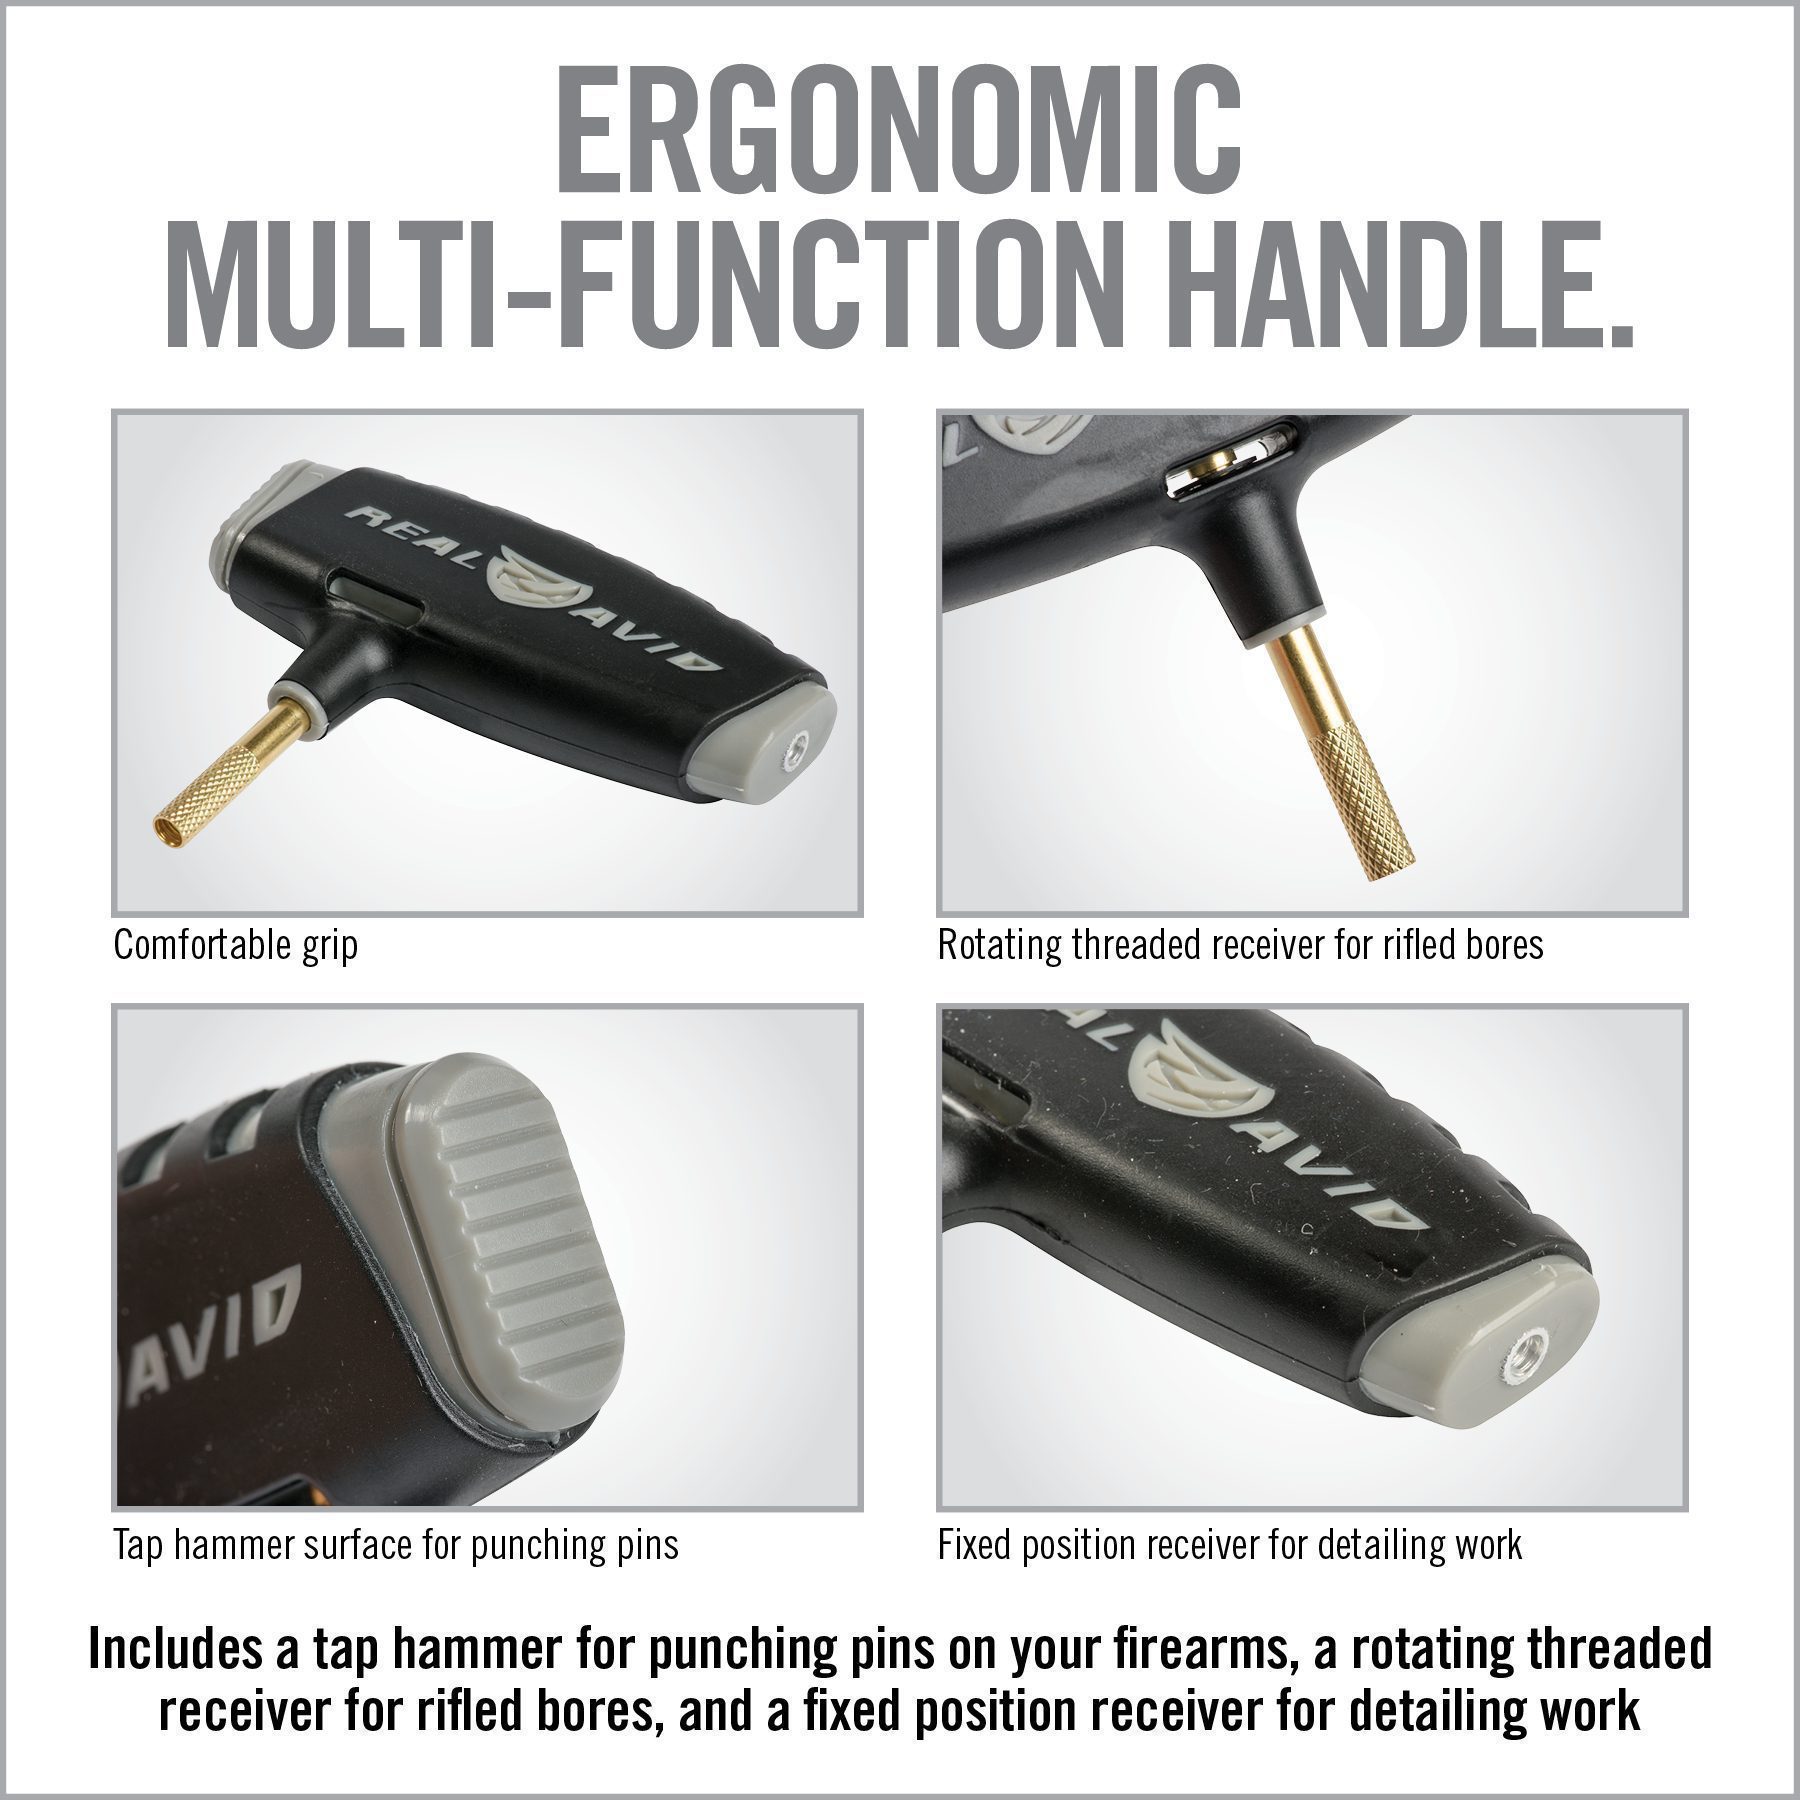 instructions for how to use an ergonomic multi - function handle